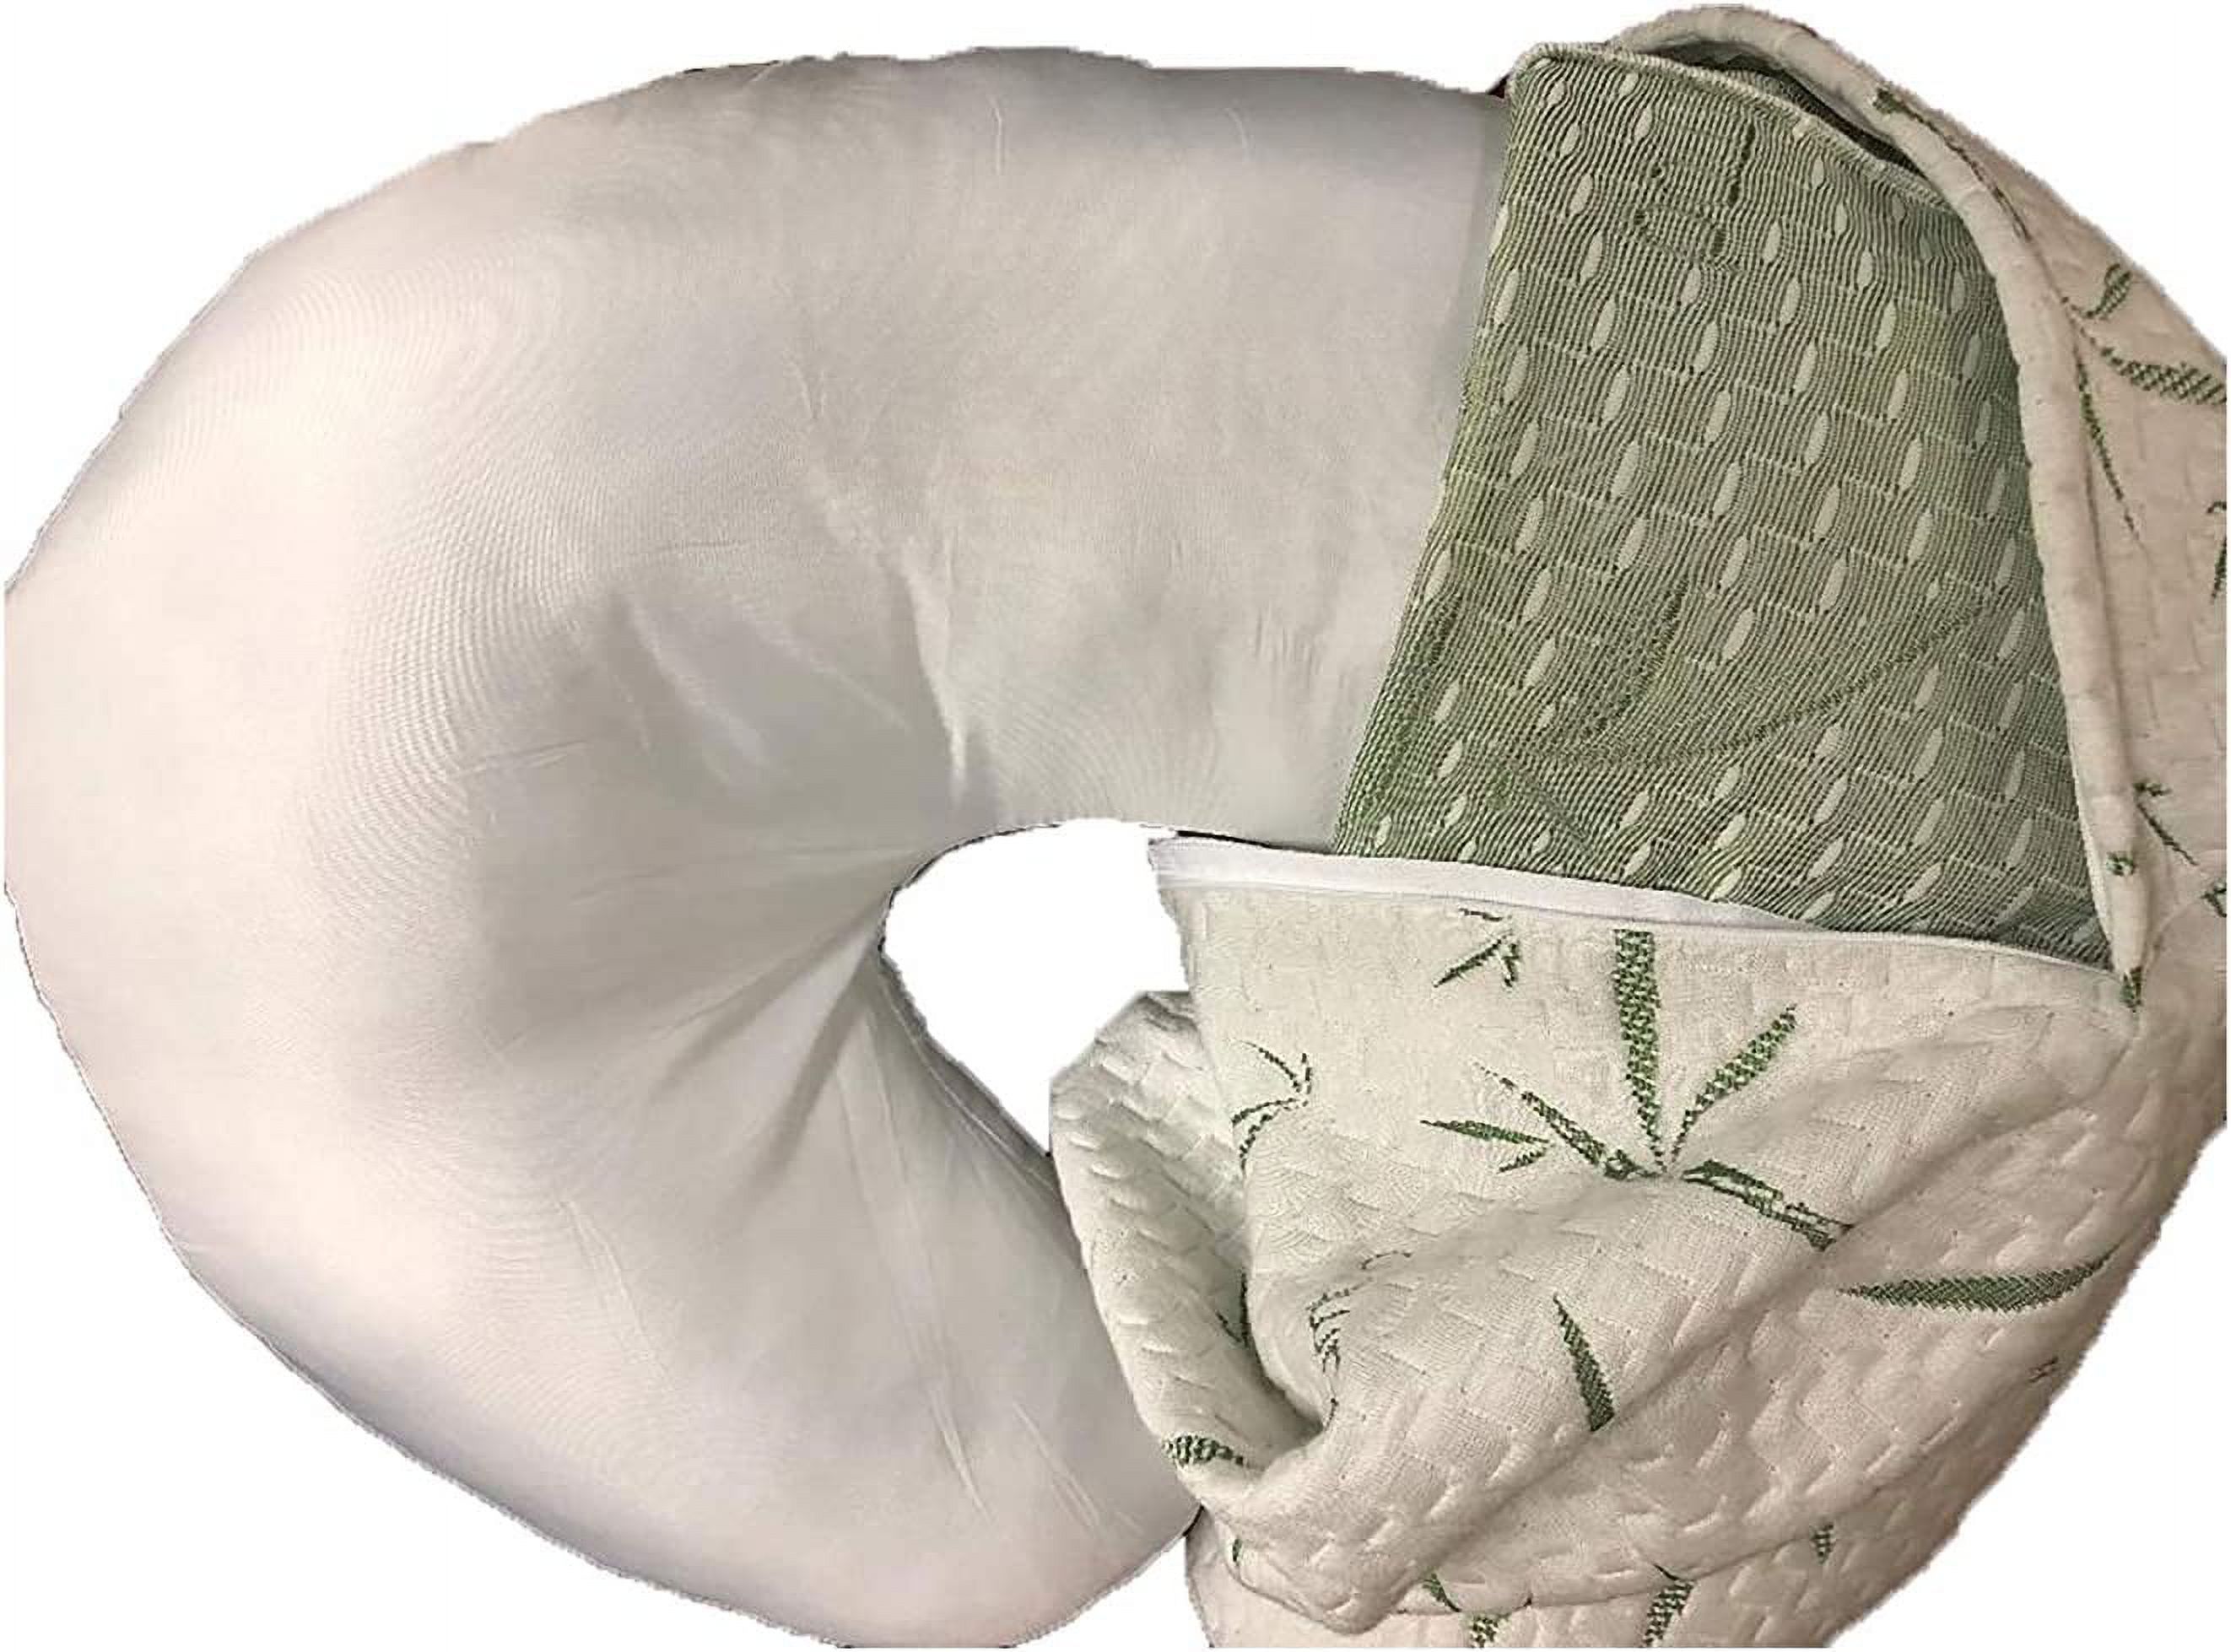 Nursing, Breastfeeding Baby Support Pillow, Newborn Infant Feeding Cushion | Portable for Travel | Nursing Pillow for Boys & Girls With Washable Zippered Bamboo Pillow Covered - image 3 of 10